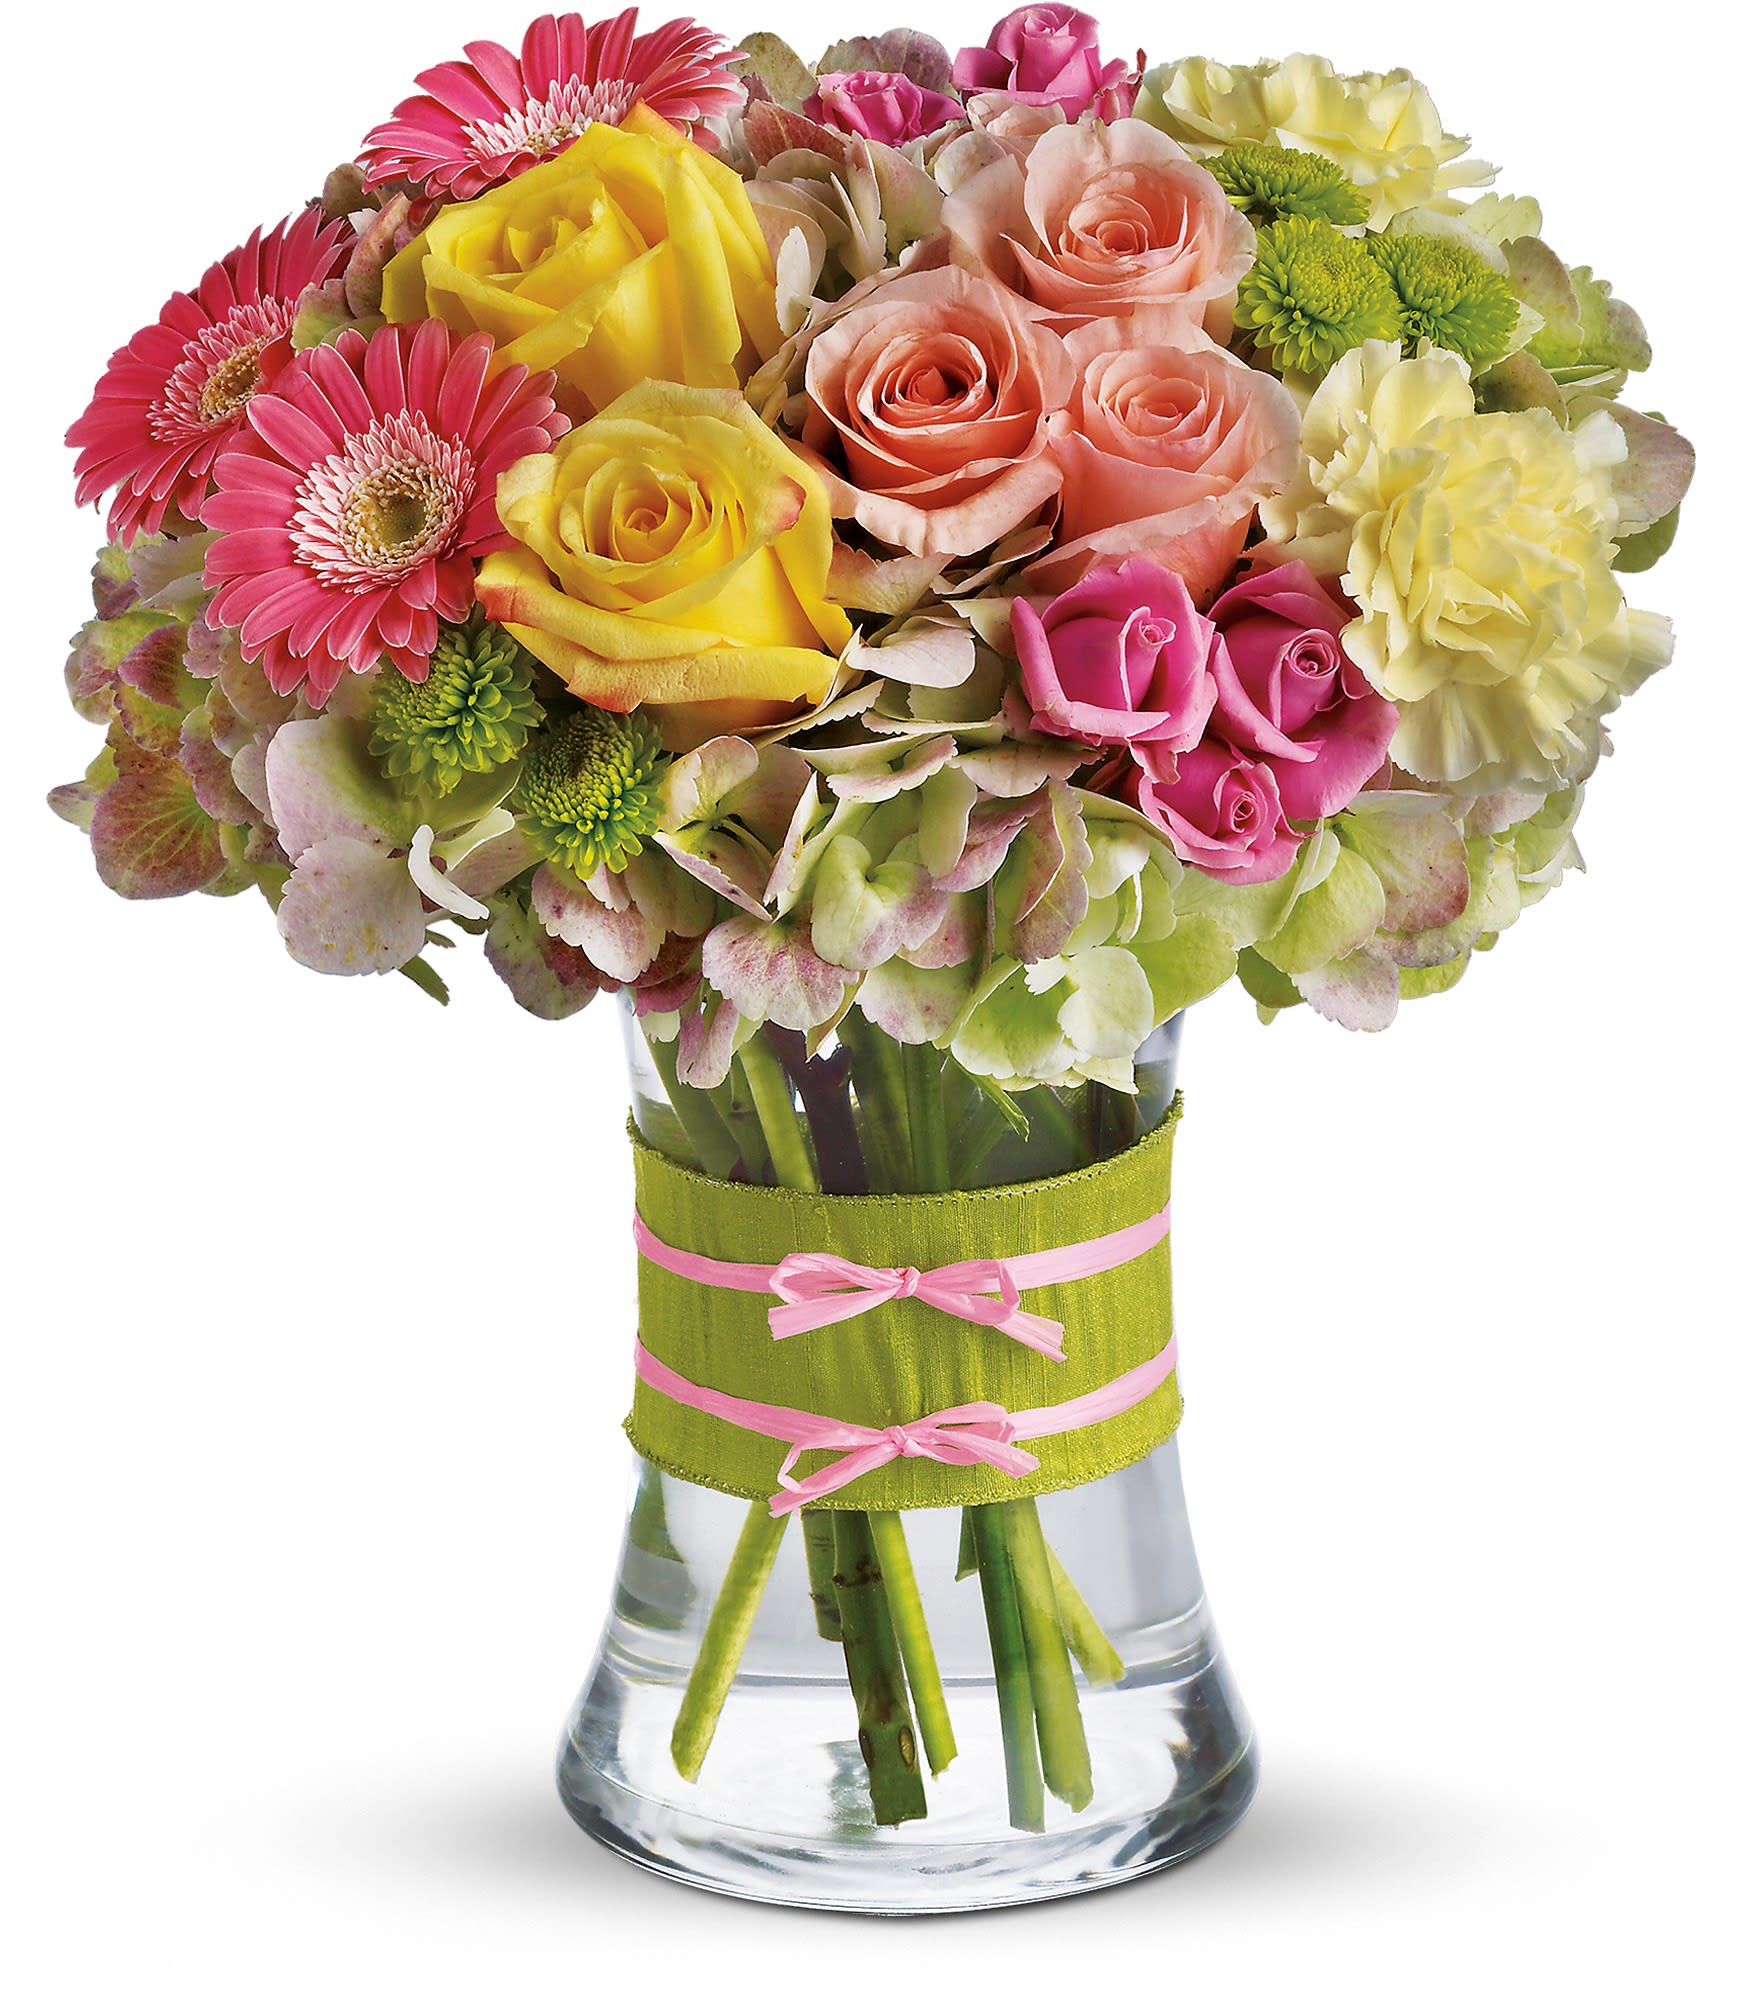 Fashionista Blooms - This arrangement would be perfect for any girl with an eye for style. It's a must-have for fashionistas everywhere.    Gorgeous green hydrangea, yellow and light pink roses, pink spray roses and mini gerberas, light yellow carnations and green button spray chrysanthemums are delivered in a pretty gathering vase. Not just any vase, of course, this one's accessorized with a chartreuse taffeta ribbon and pink raffia.    Approximately 10&quot; W x 11&quot; H    Orientation: All-Around        As Shown : T155-1A      Deluxe : T155-1B      Premium : T155-1C    